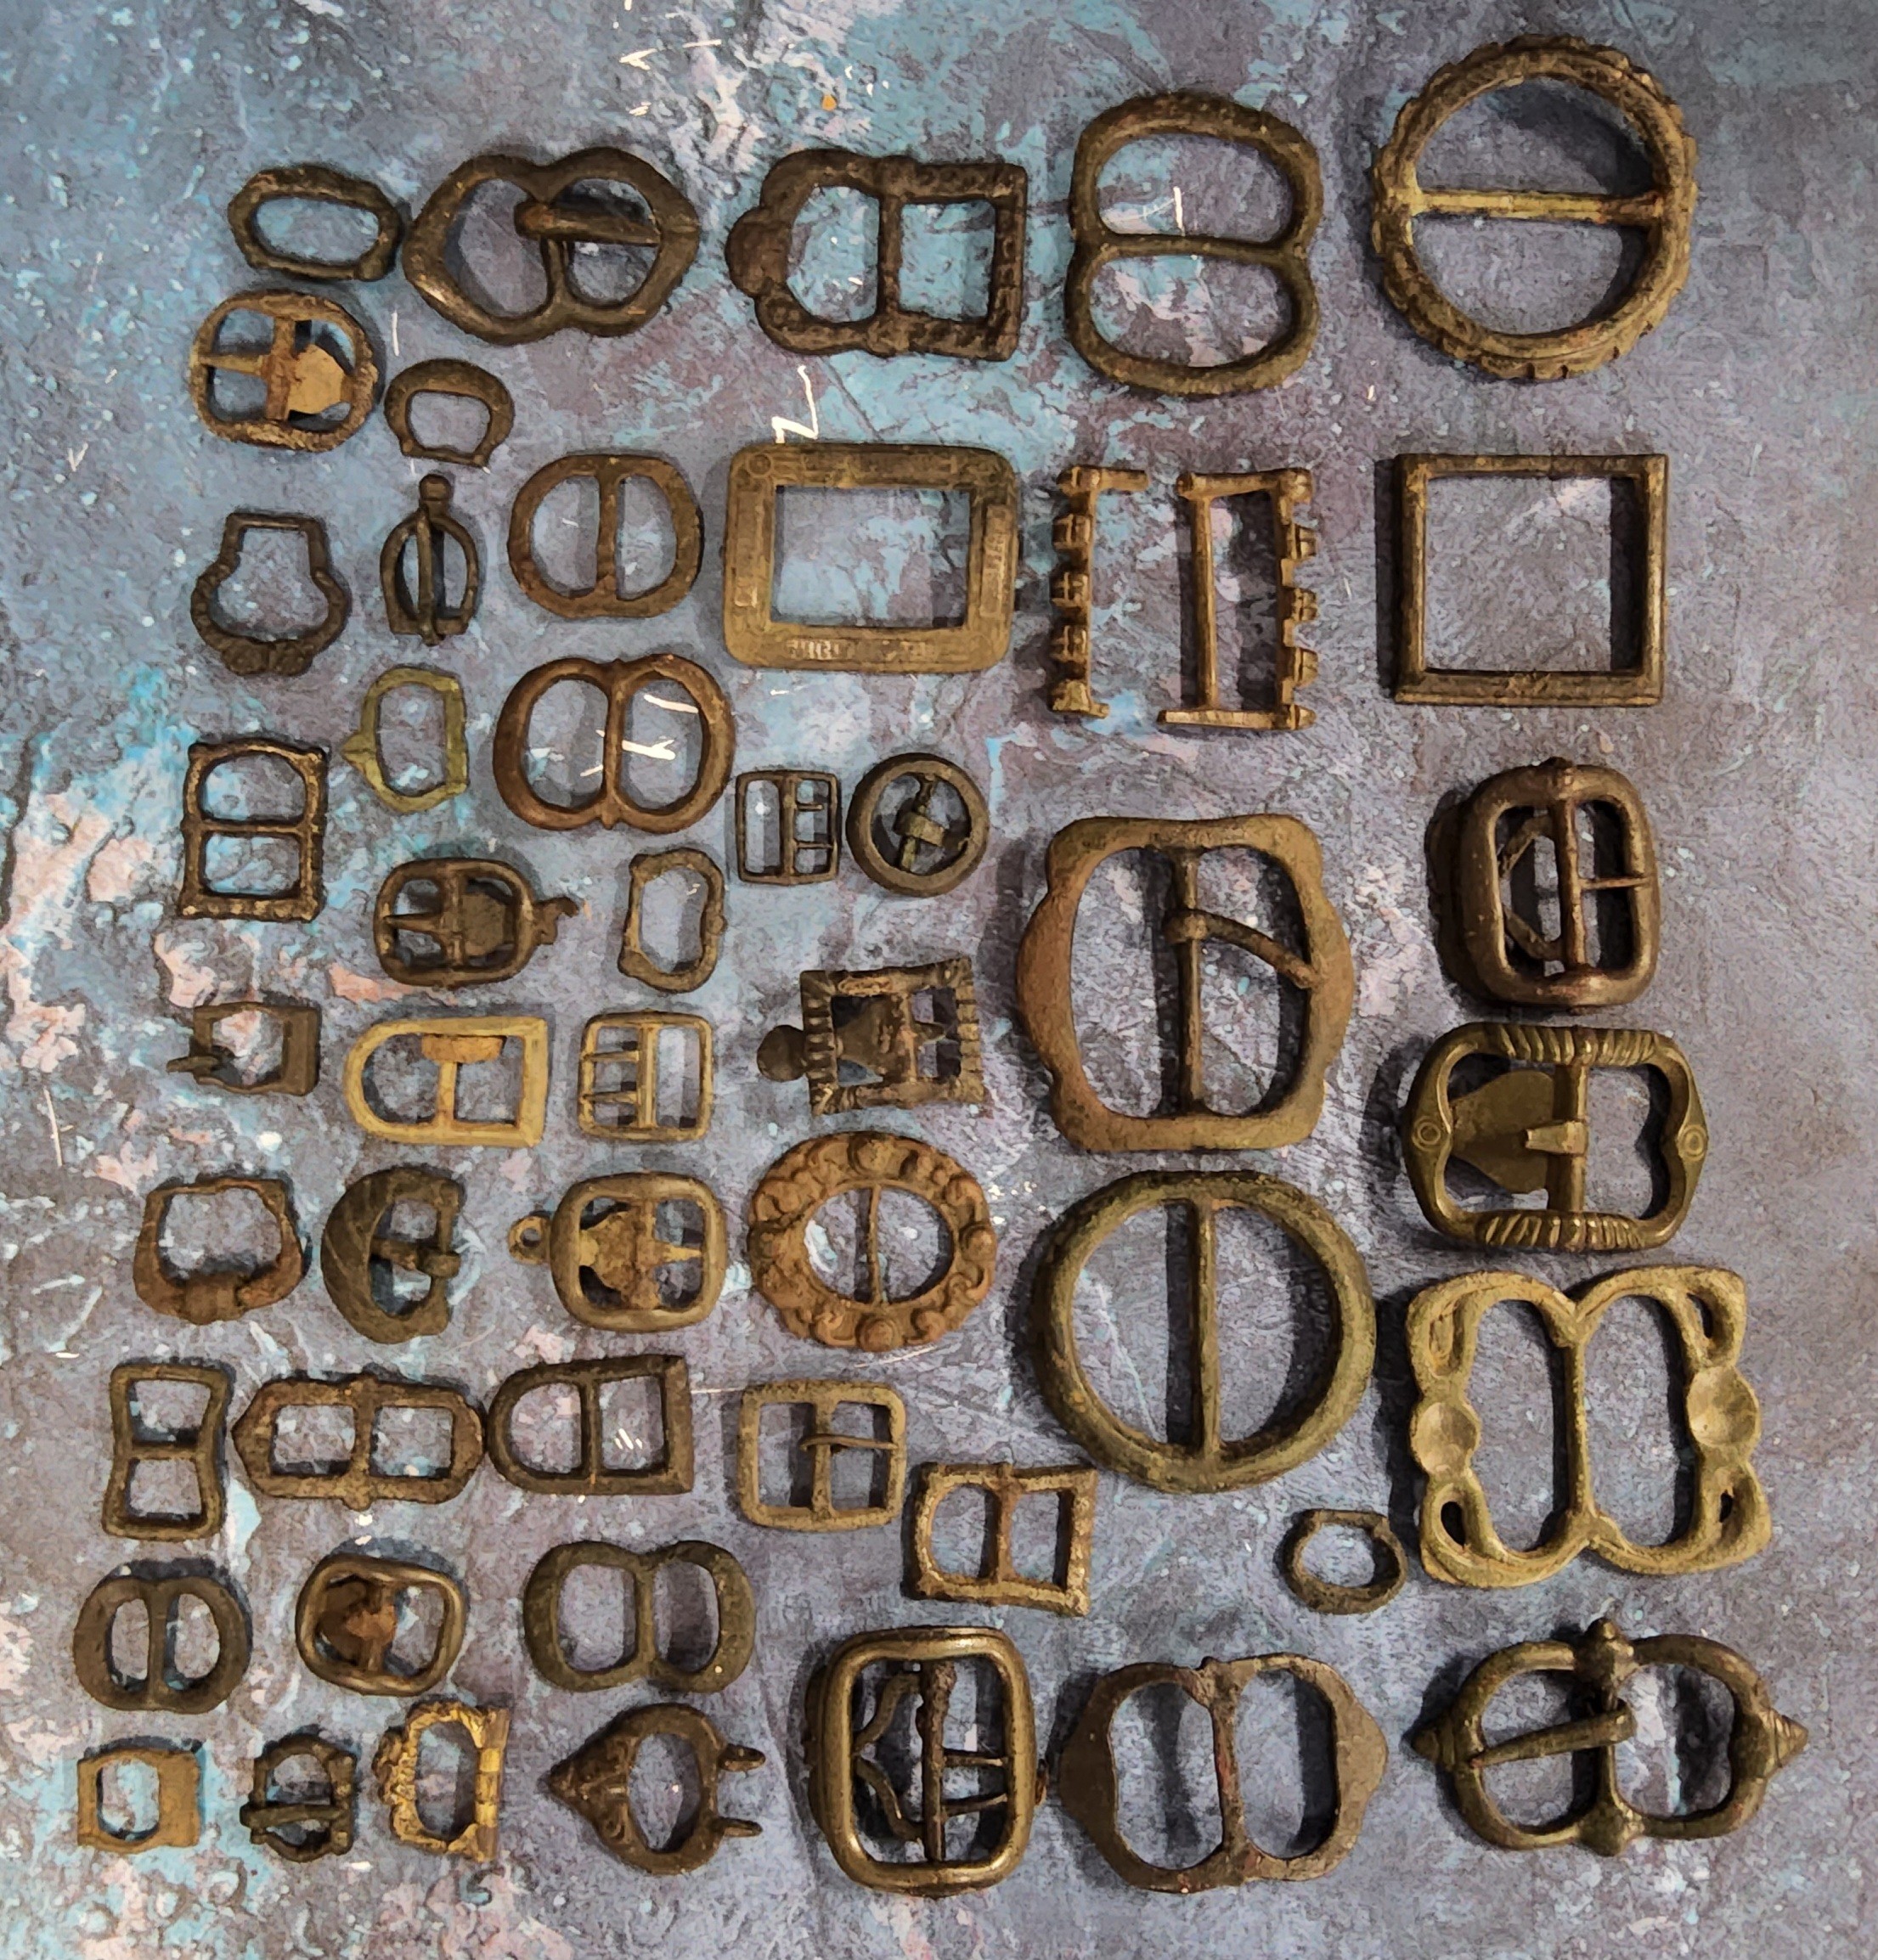 Metal Detecting Finds - Viking and Later, Bronze buckles (over 45), mainly 14th century,